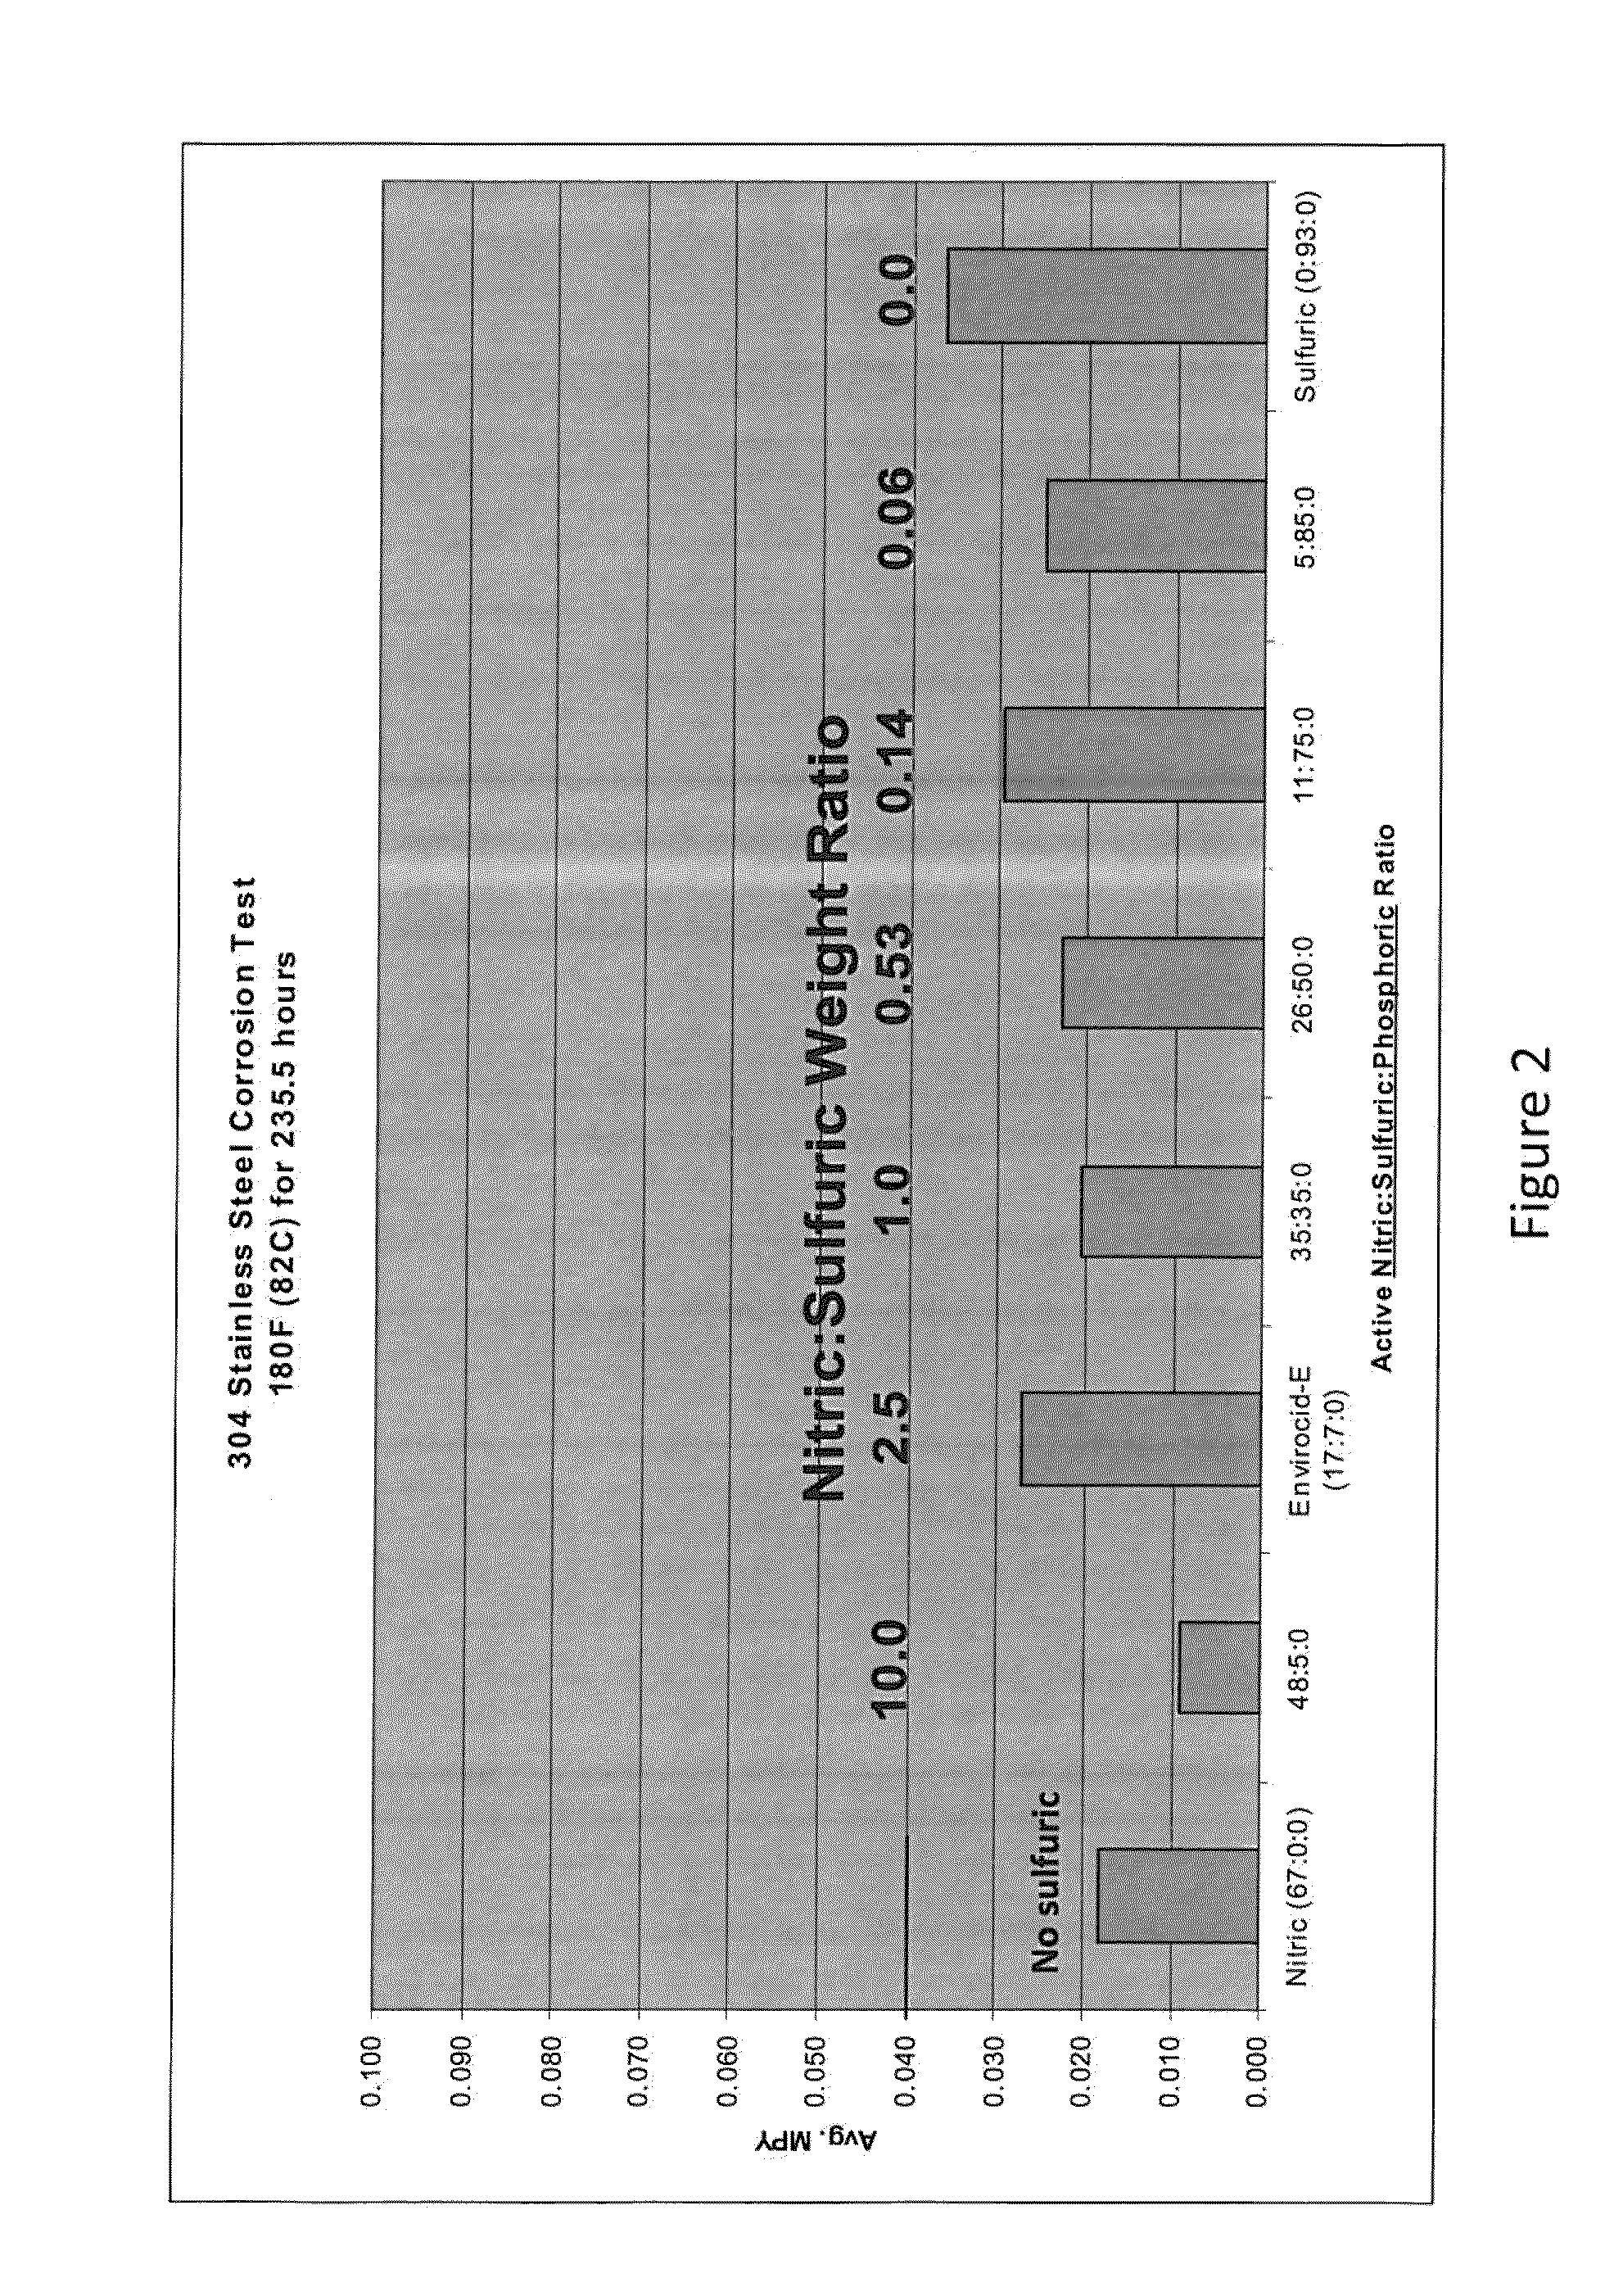 Acid cleaning and corrosion inhibiting compositions comprising a blend of nitric and sulfuric acid